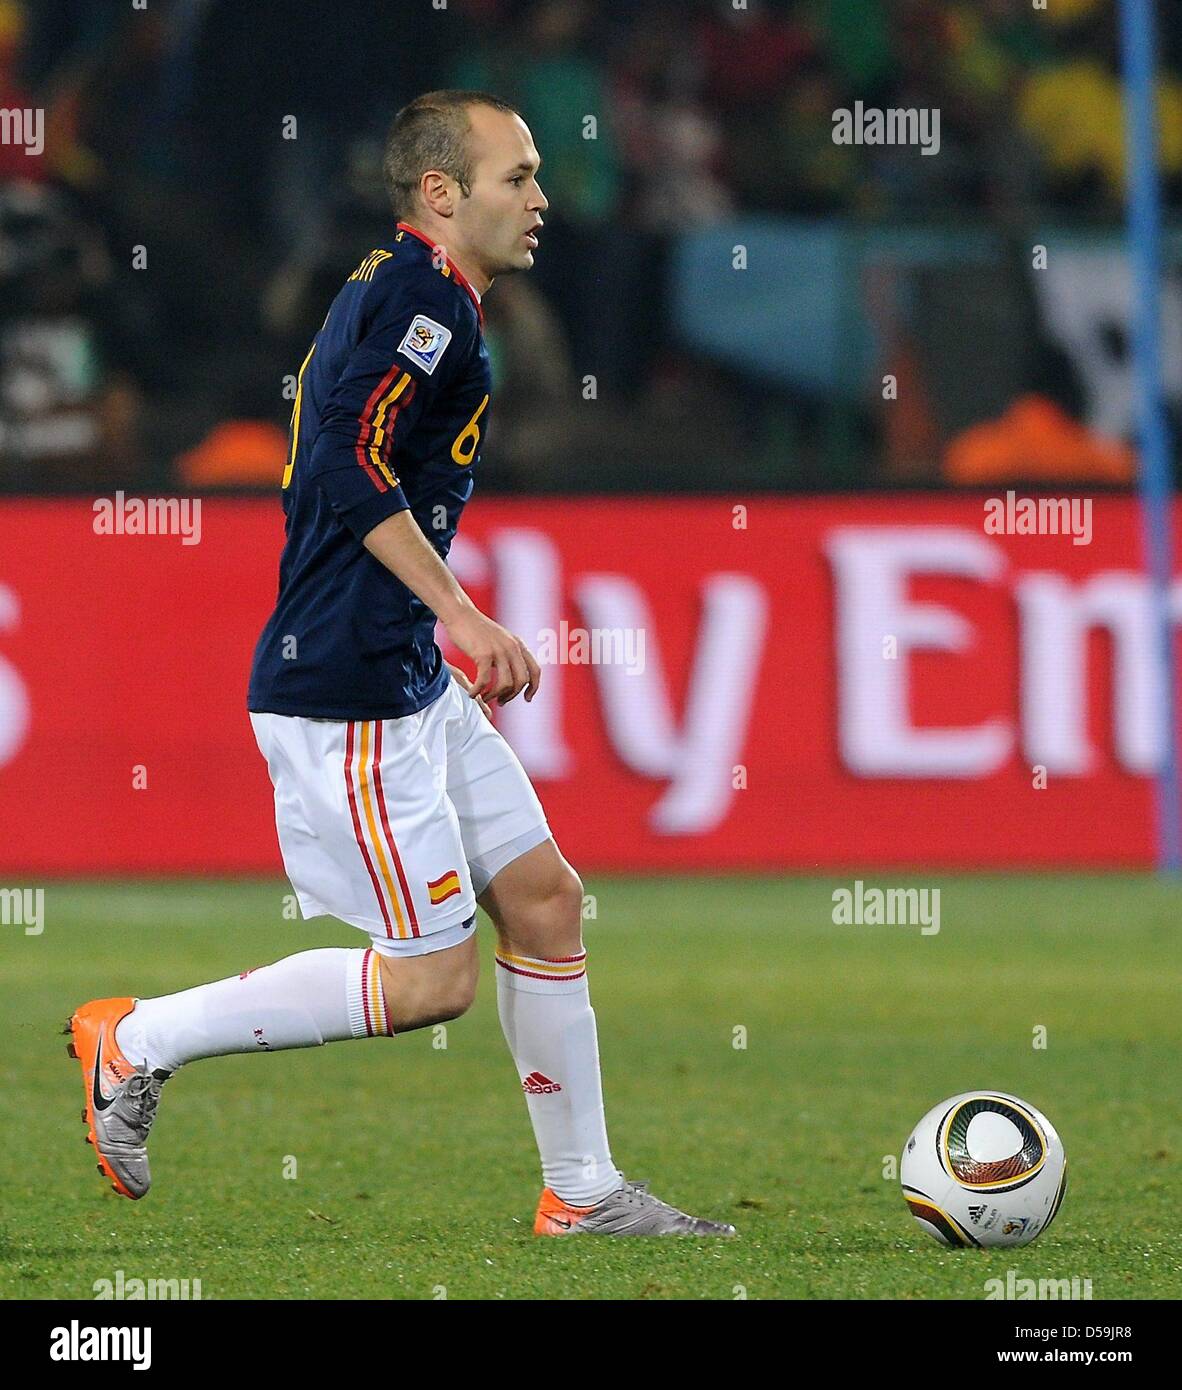 Spain's Andres Iniesta during the 2010 FIFA World Cup group H match between Chile and Spain at Loftus Versfeld Stadium in Pretoria, South Africa 25 June 2010. Photo: Marcus Brandt dpa - Please refer to http://dpaq.de/FIFA-WM2010-TC Stock Photo